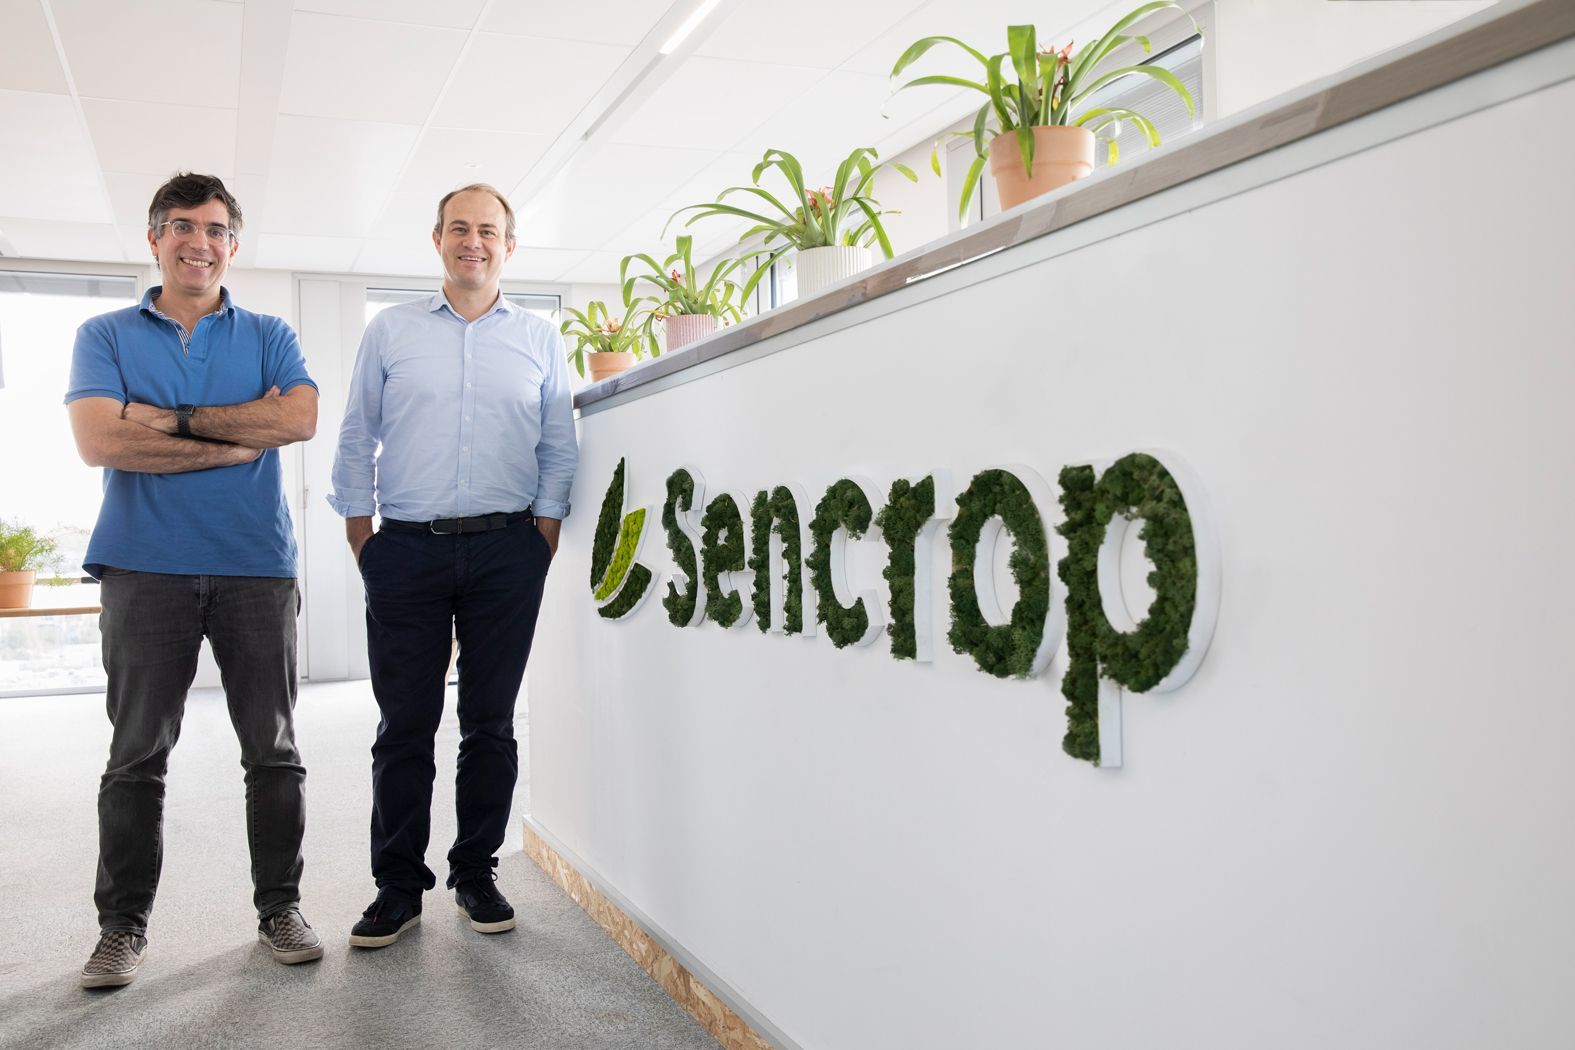 Sencrop, a leader in microclimate technology, raises $18 million 
in a funding round led by JVP 
to accelerate the digital and environmental revolution in agriculture